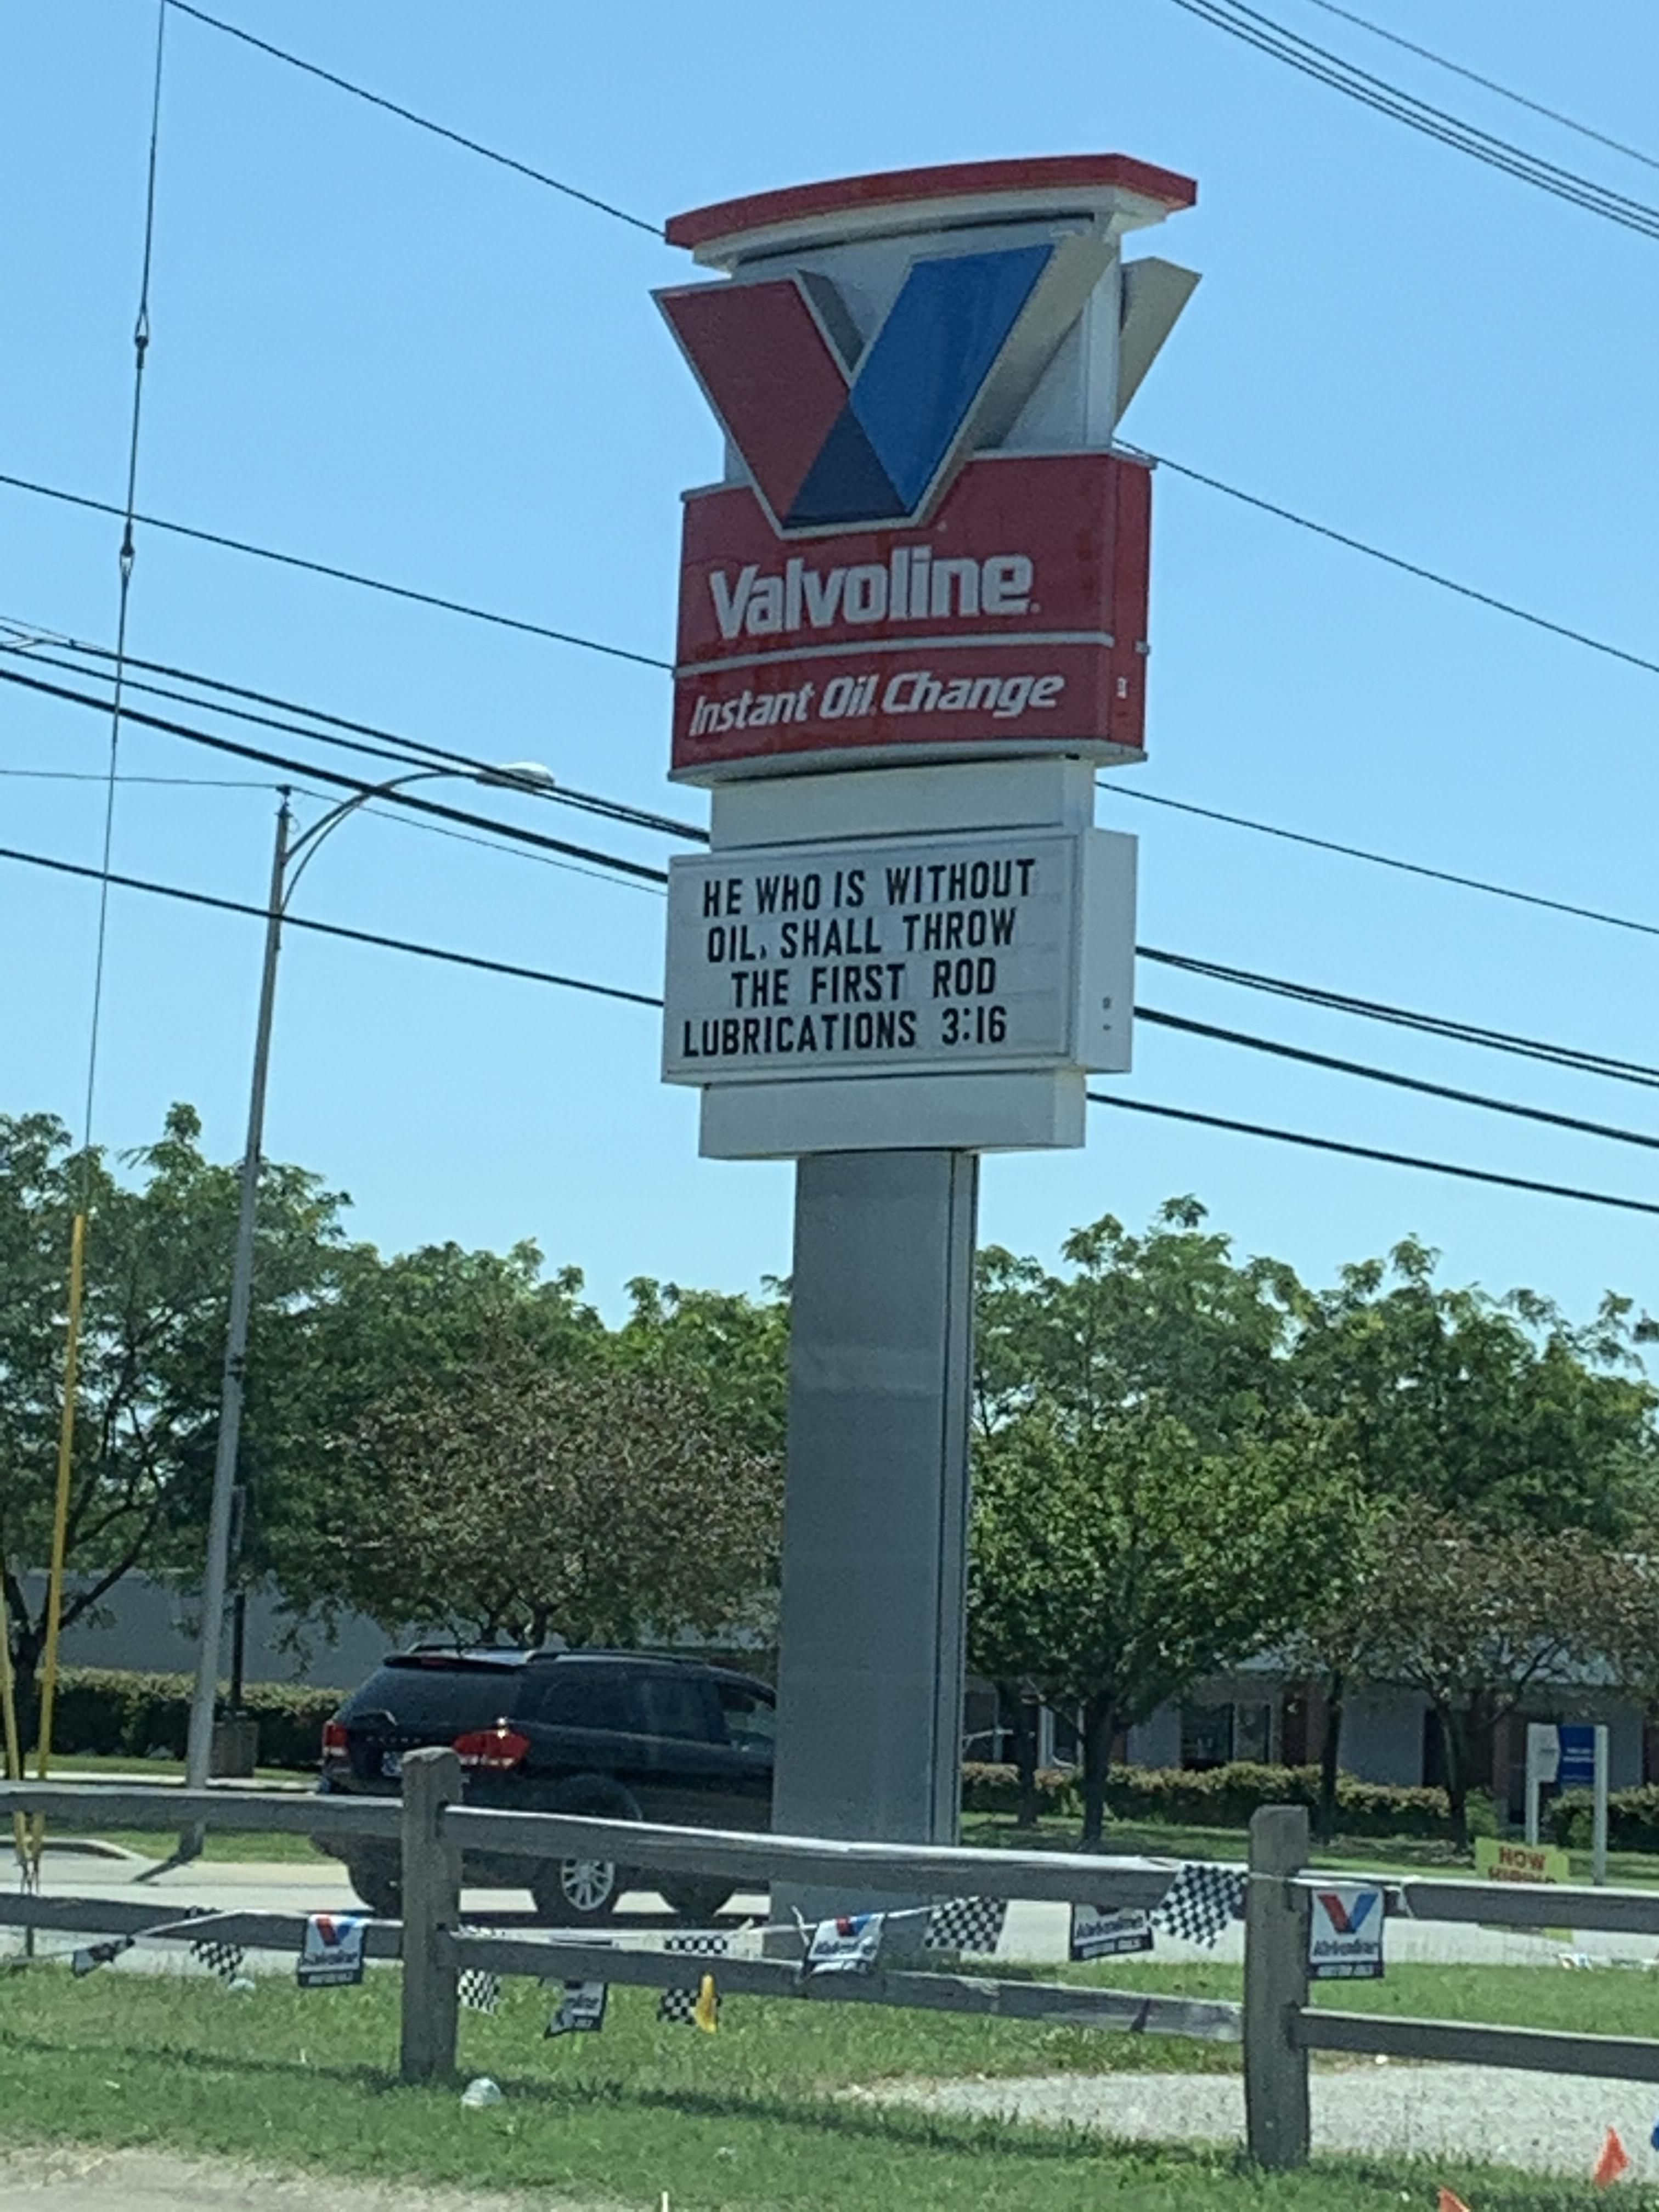 Car humor from a local quick lube.